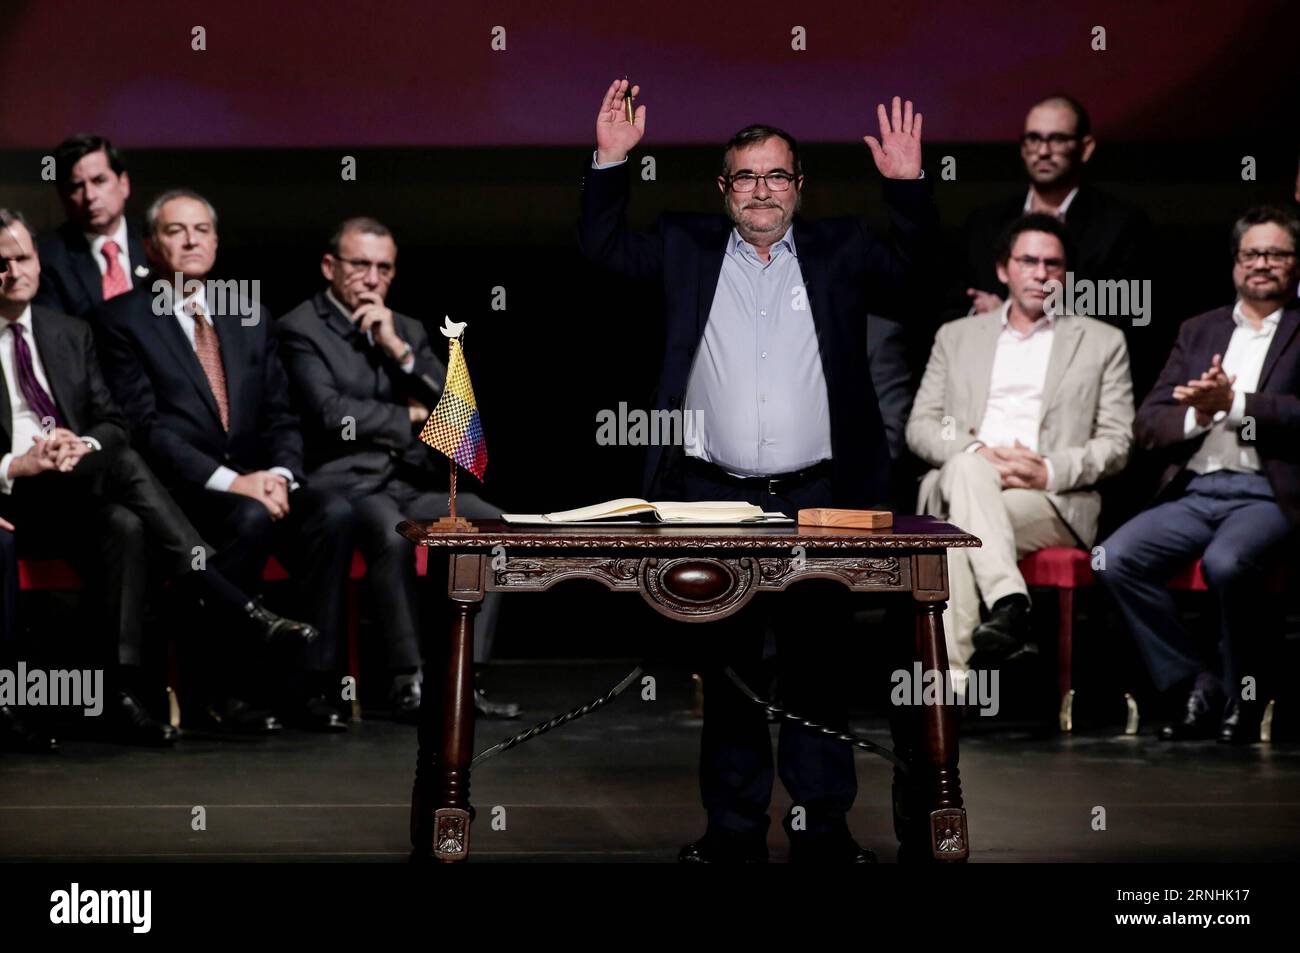 Kolumbien schließt neues Abkommen mit FARC-Guerilla (161124) -- BOGOTA, Nov. 24, 2016 -- The leader of the Revolutionary Armed Forces of Colombia (FARC), Rodrigo Londono (front), participates in the signing ceremony of a revised peace agreement between the Colombian government and the FARC at Colon Theater in Bogota, capital of Colombia, on Nov. 24, 2016. Colombian President Juan Manuel Santos and Rodrigo Londono signed a revised peace agreement here on Thursday. This revised agreement will be sent to Congress. ) COLOMBIA-BOGOTA-GOVERNMENT-FARC-REVISED PEACE AGREEMENT-SIGNING JhonxPaz PUBLICAT Stock Photo